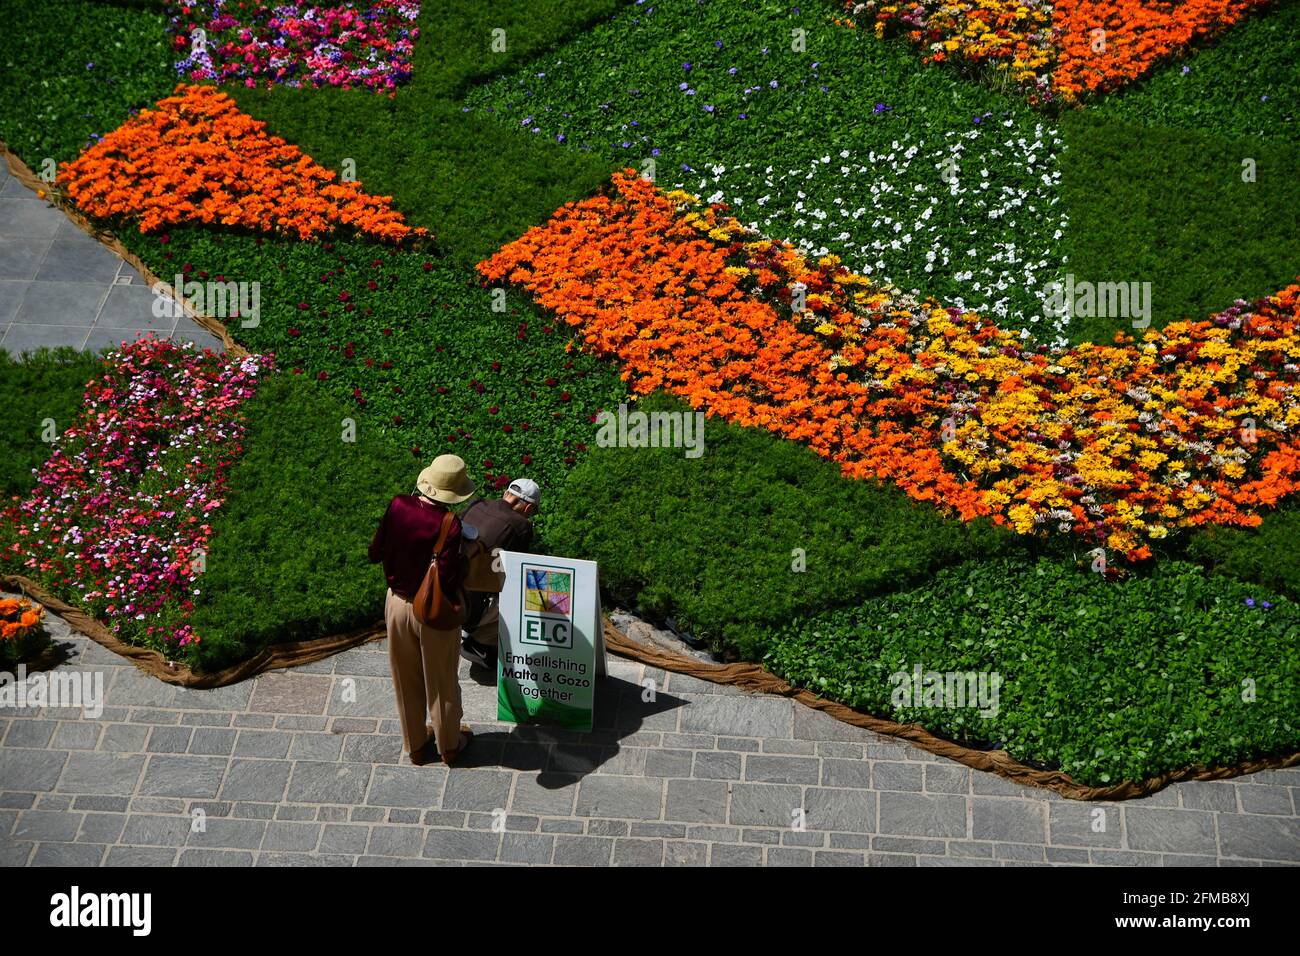 Valletta, Malta. 7th May, 2021. St. George's Square is decorated with flowers and plants during Valletta Green Festival in Valletta, capital of Malta, on May 7, 2021. The Valletta Green Festival was launched on Friday with this year's theme of "zero pollution". Credit: Jonathan Borg/Xinhua/Alamy Live News Stock Photo